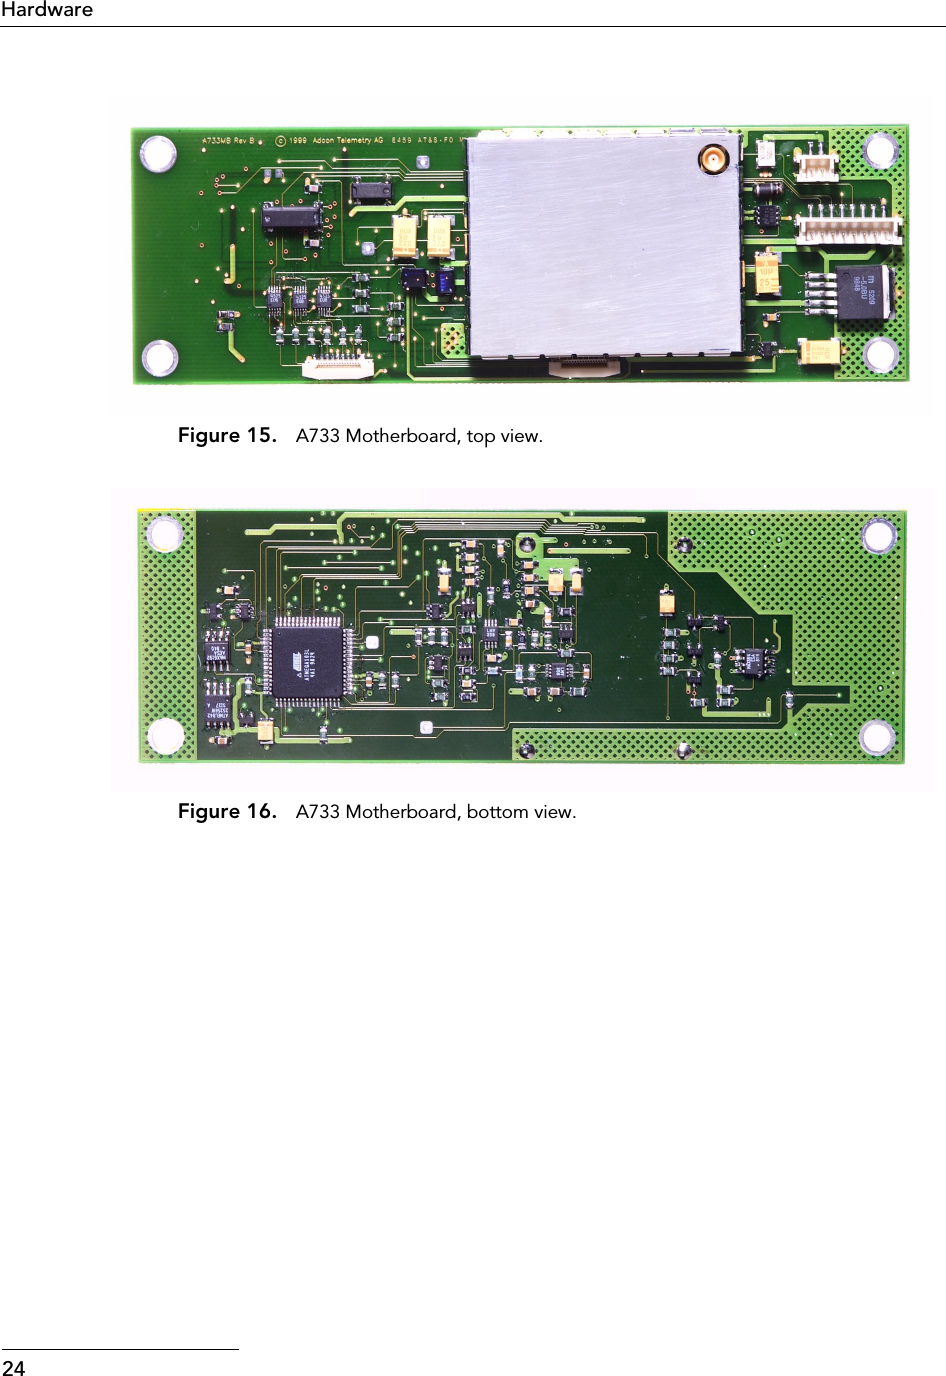  24Hardware Figure 15. A733 Motherboard, top view. Figure 16. A733 Motherboard, bottom view.